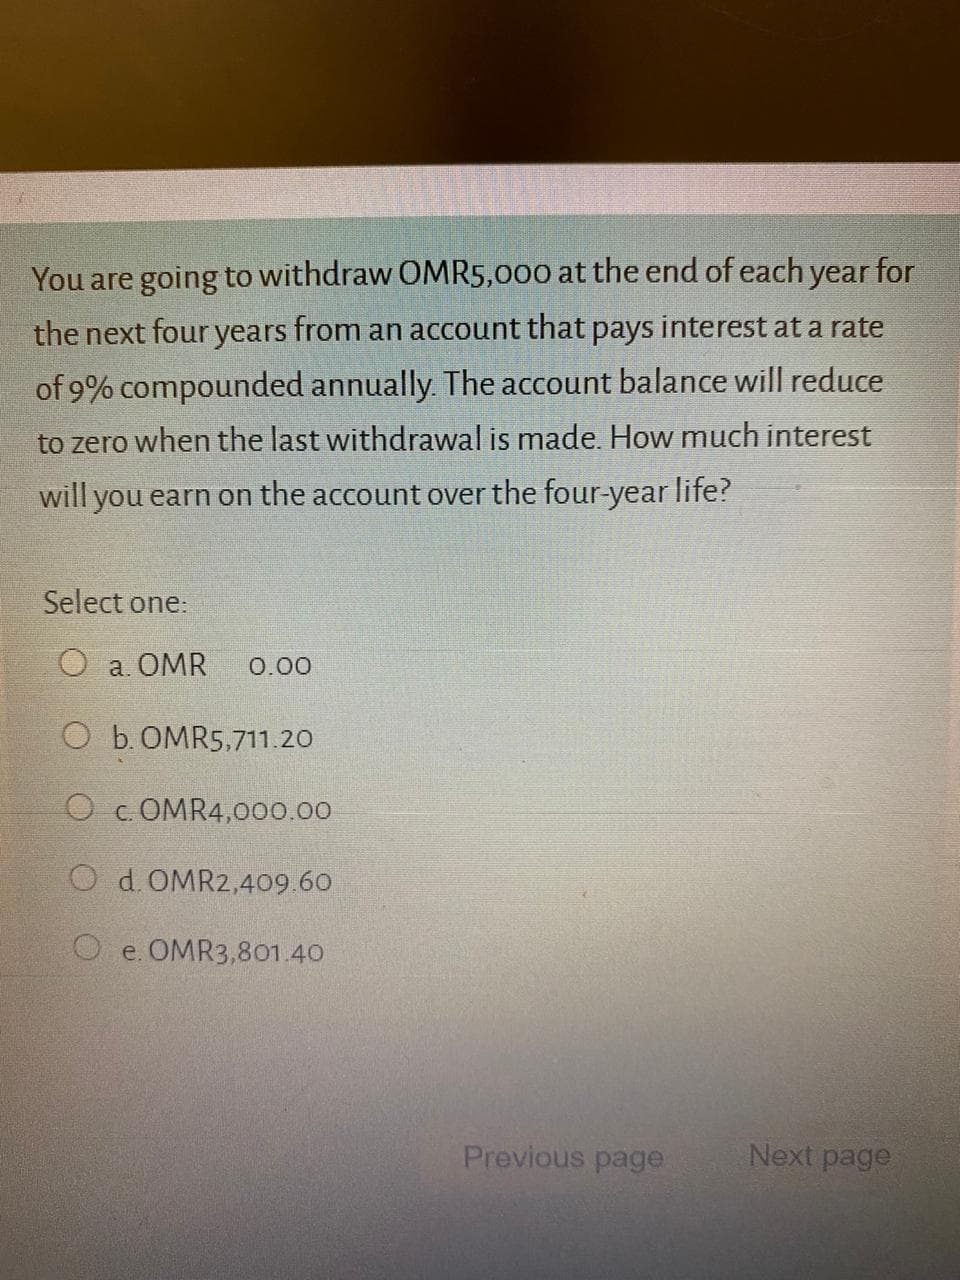 You are going to withdraw OMR5,000 at the end of each year for
the next four years from an account that pays interest at a rate
of 9% compounded annually. The account balance will reduce
to zero when the last withdrawal is made. How much interest
will you earn on the account over the four-year life?
